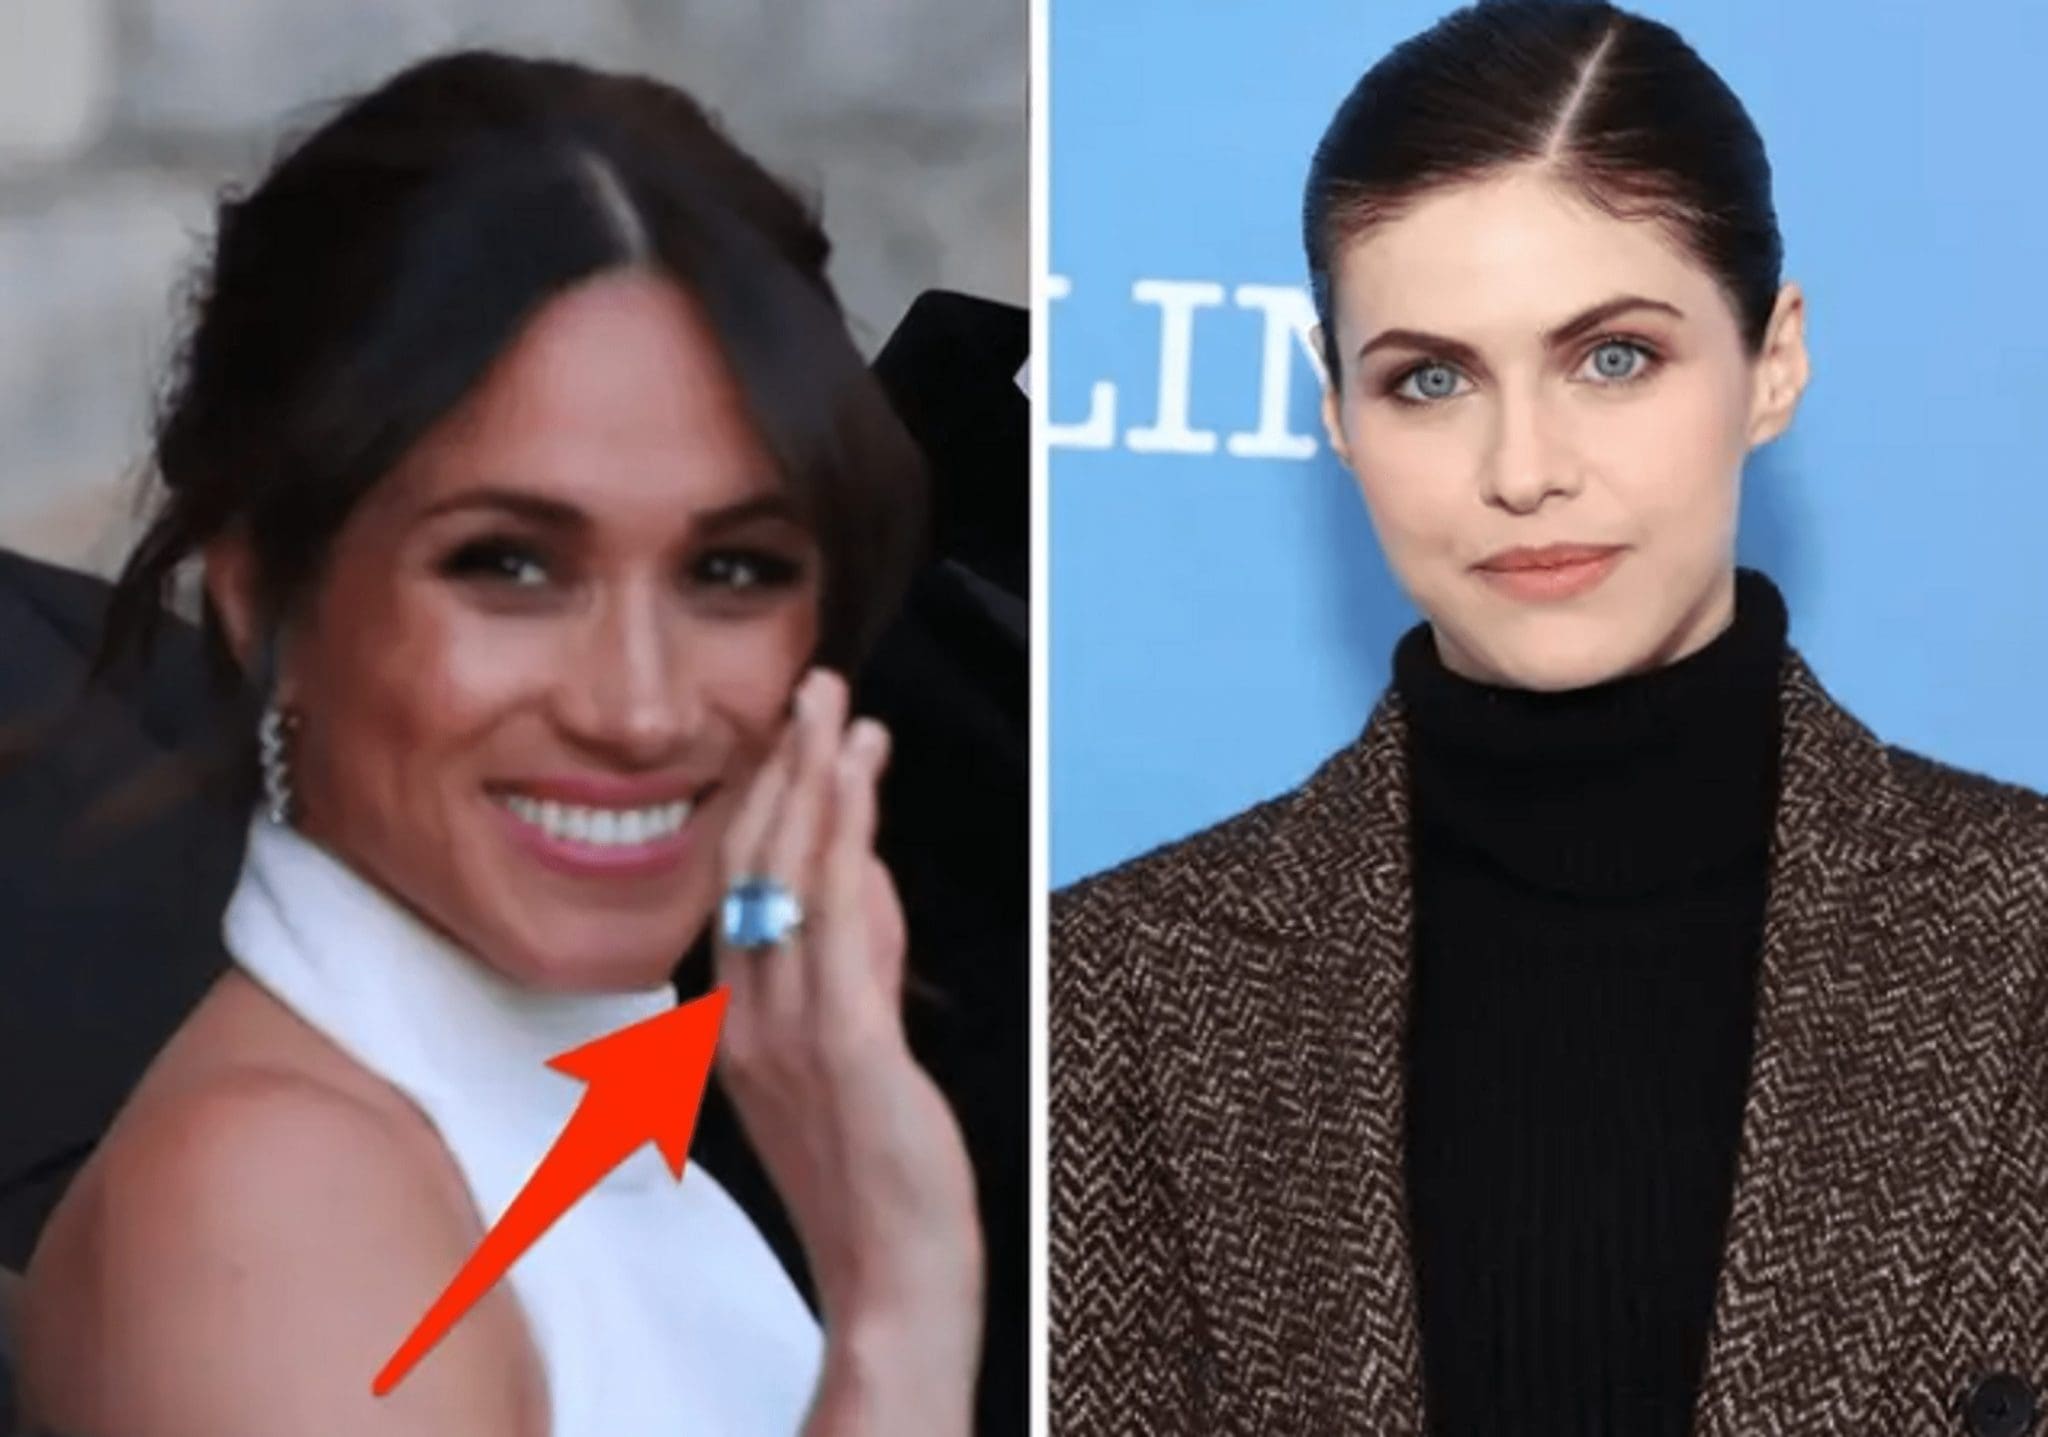 The Engagement Ring Of Meghan Markle Was Imitated By Actress Alexandra Daddario